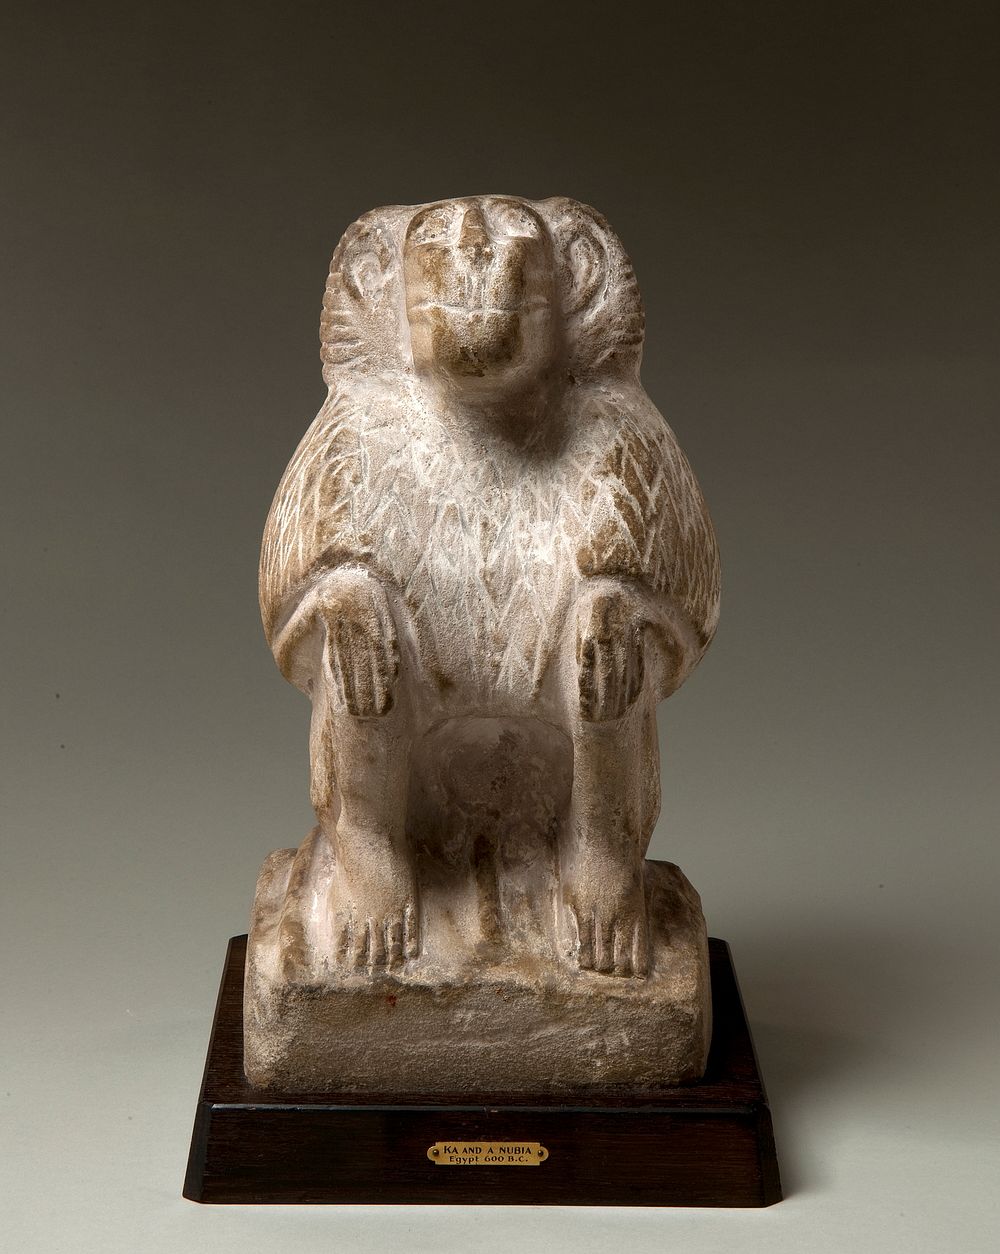 Statue of a Thoth Baboon by Unidentified artist